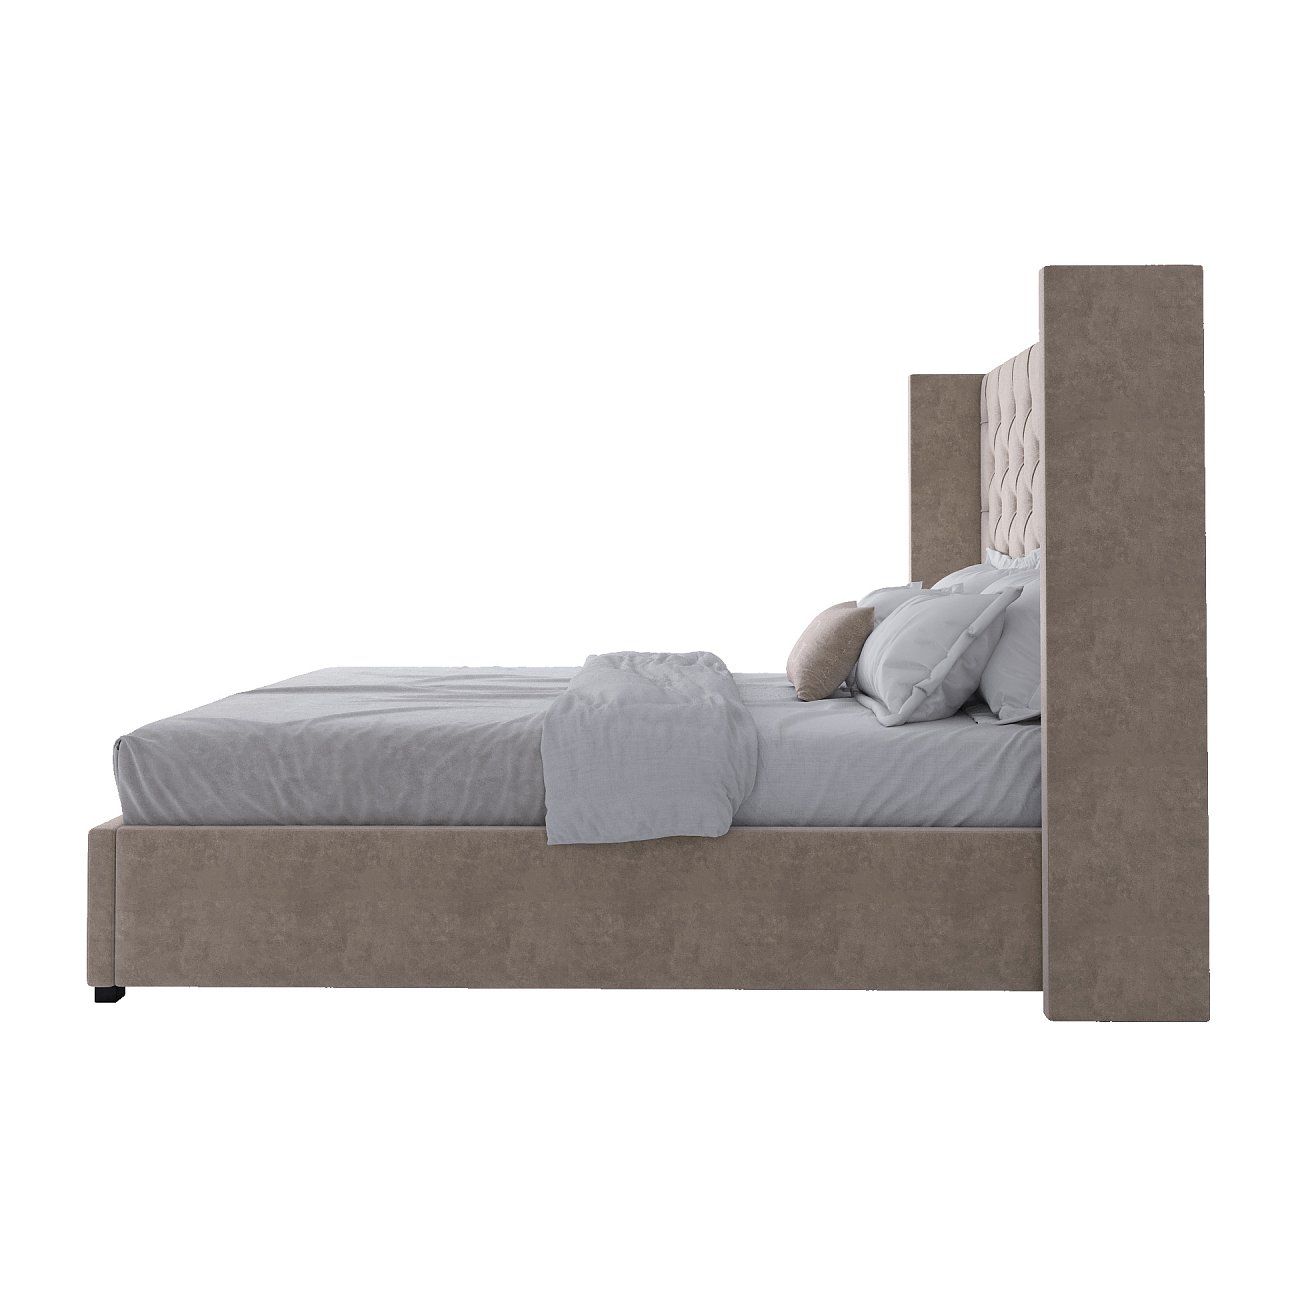 Double bed with upholstered headboard 160x200 cm beige Wing-2